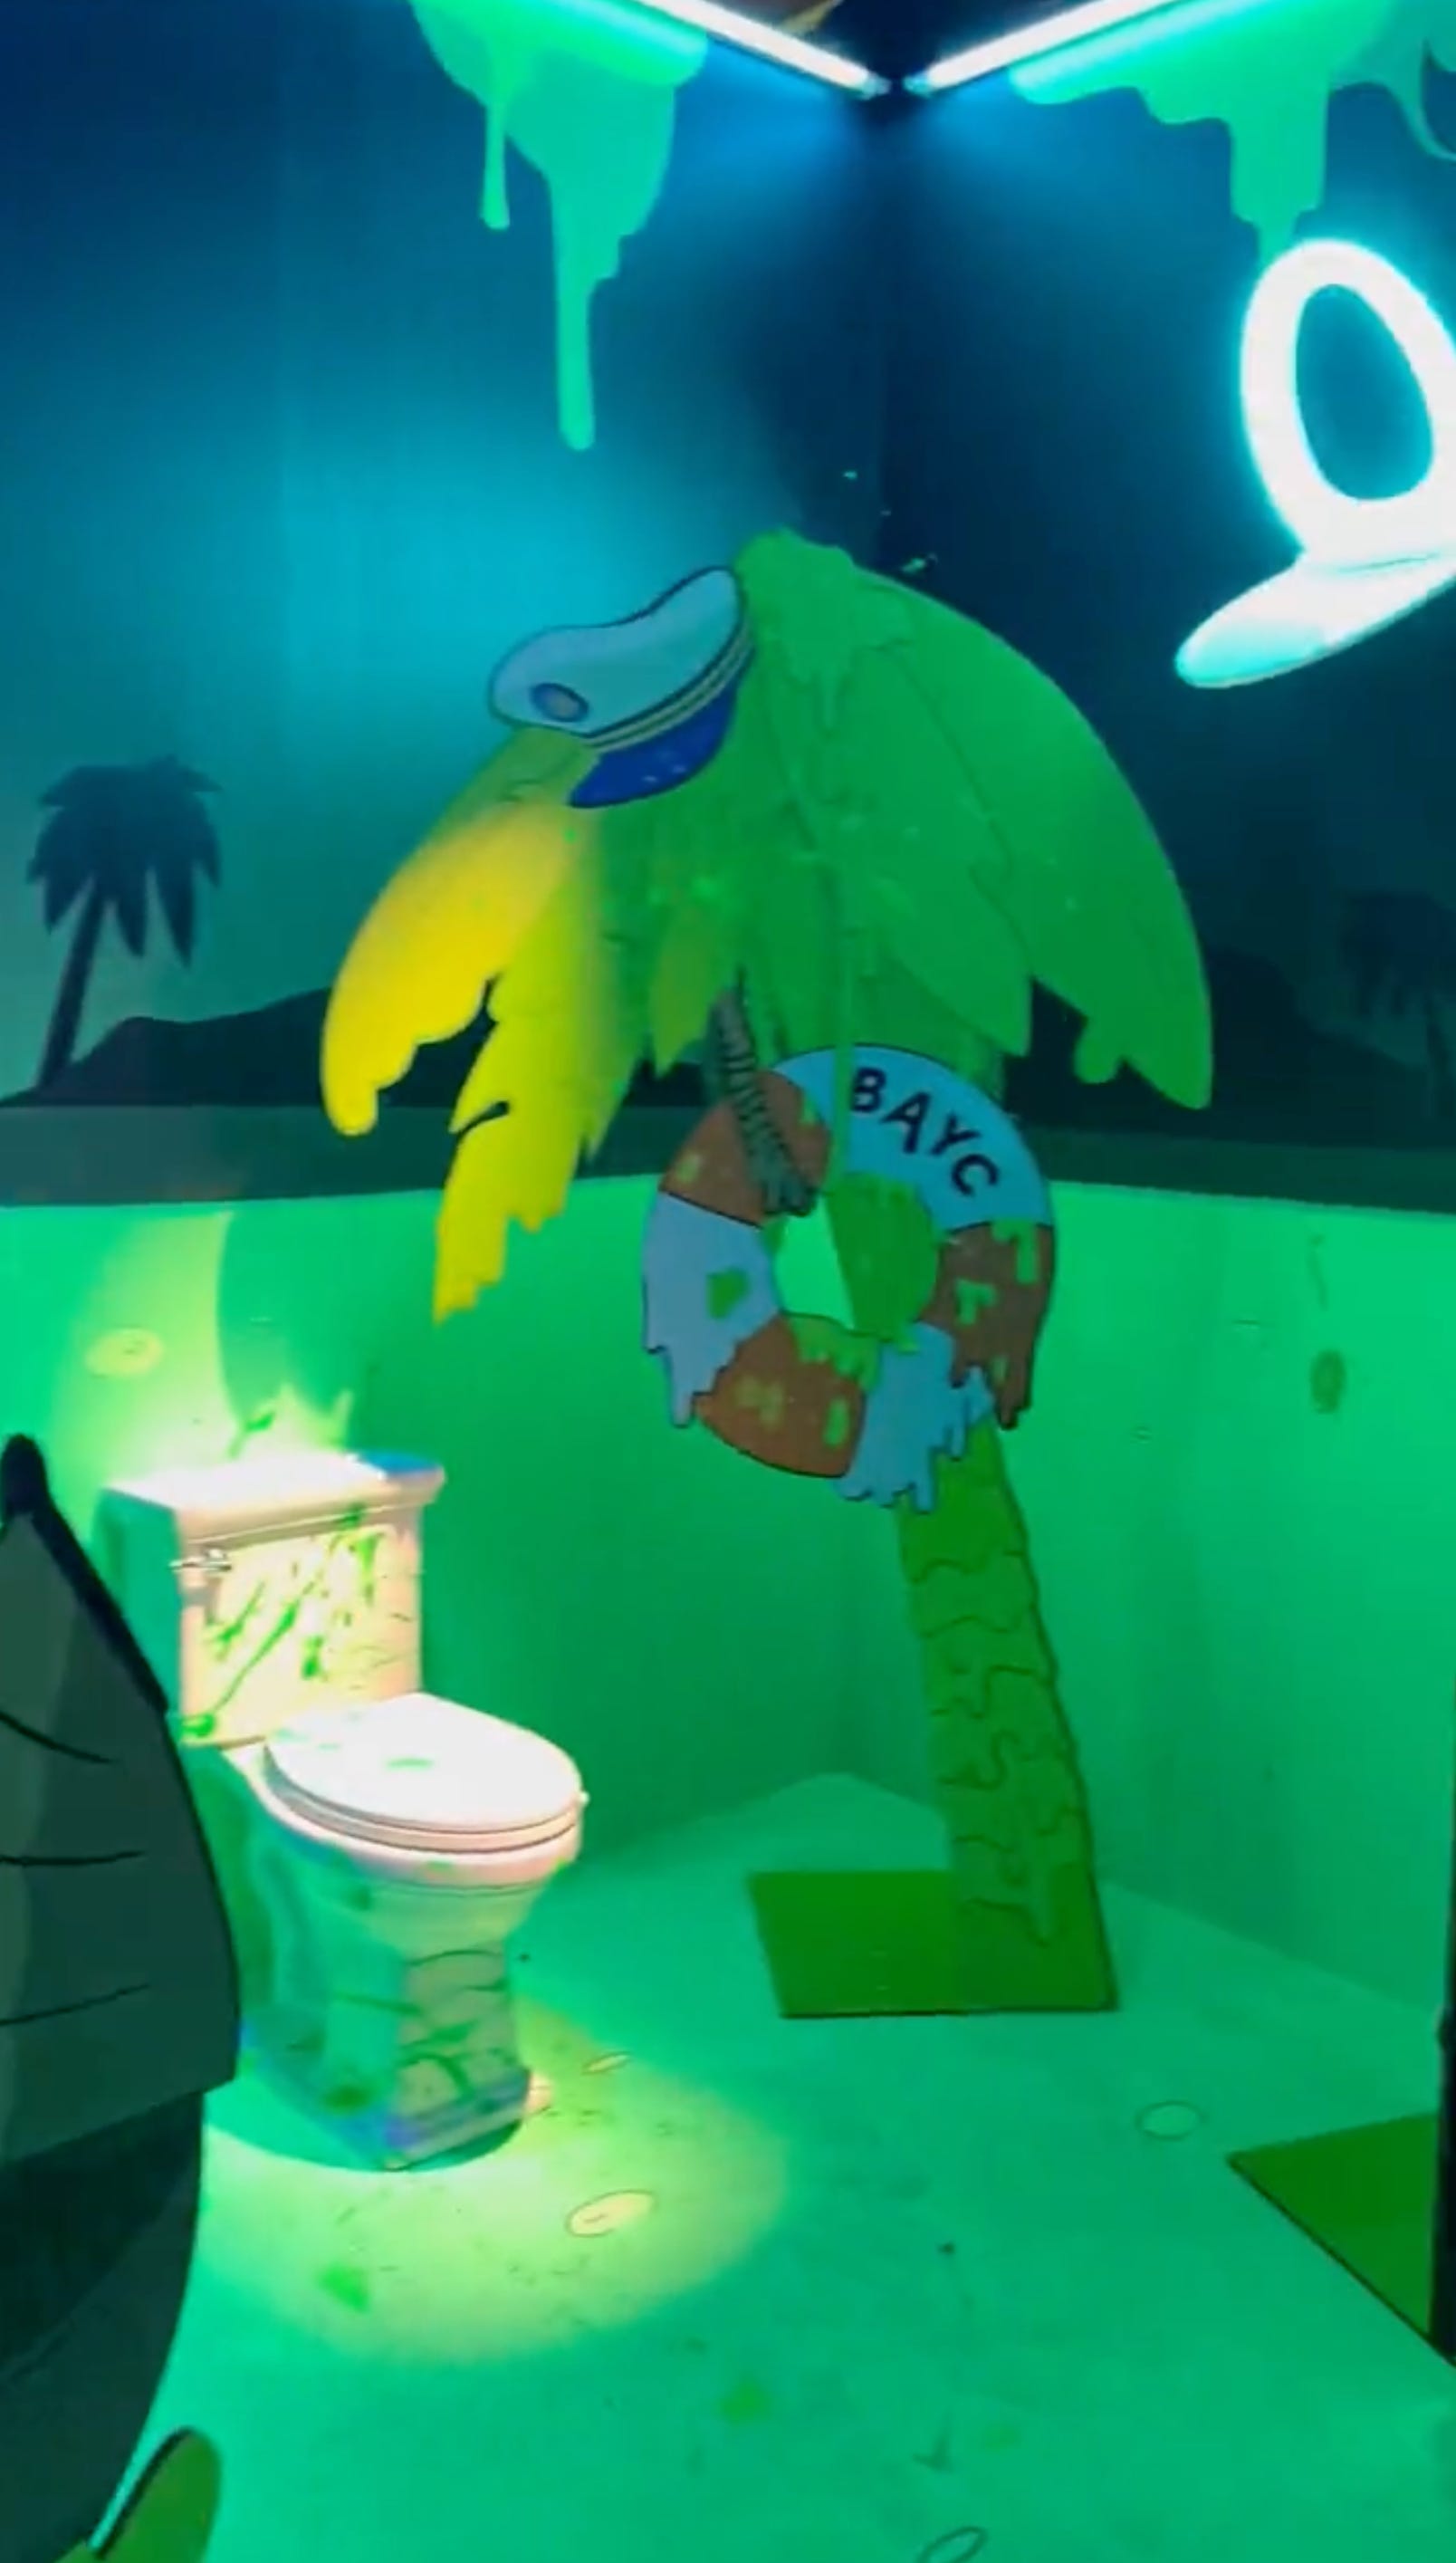 A room with a toilet, a cardboard cutout of a palm tree with a sailor hat and BAYC life ring. The walls are adorned with toilet seats and the room is lit with blacklights.